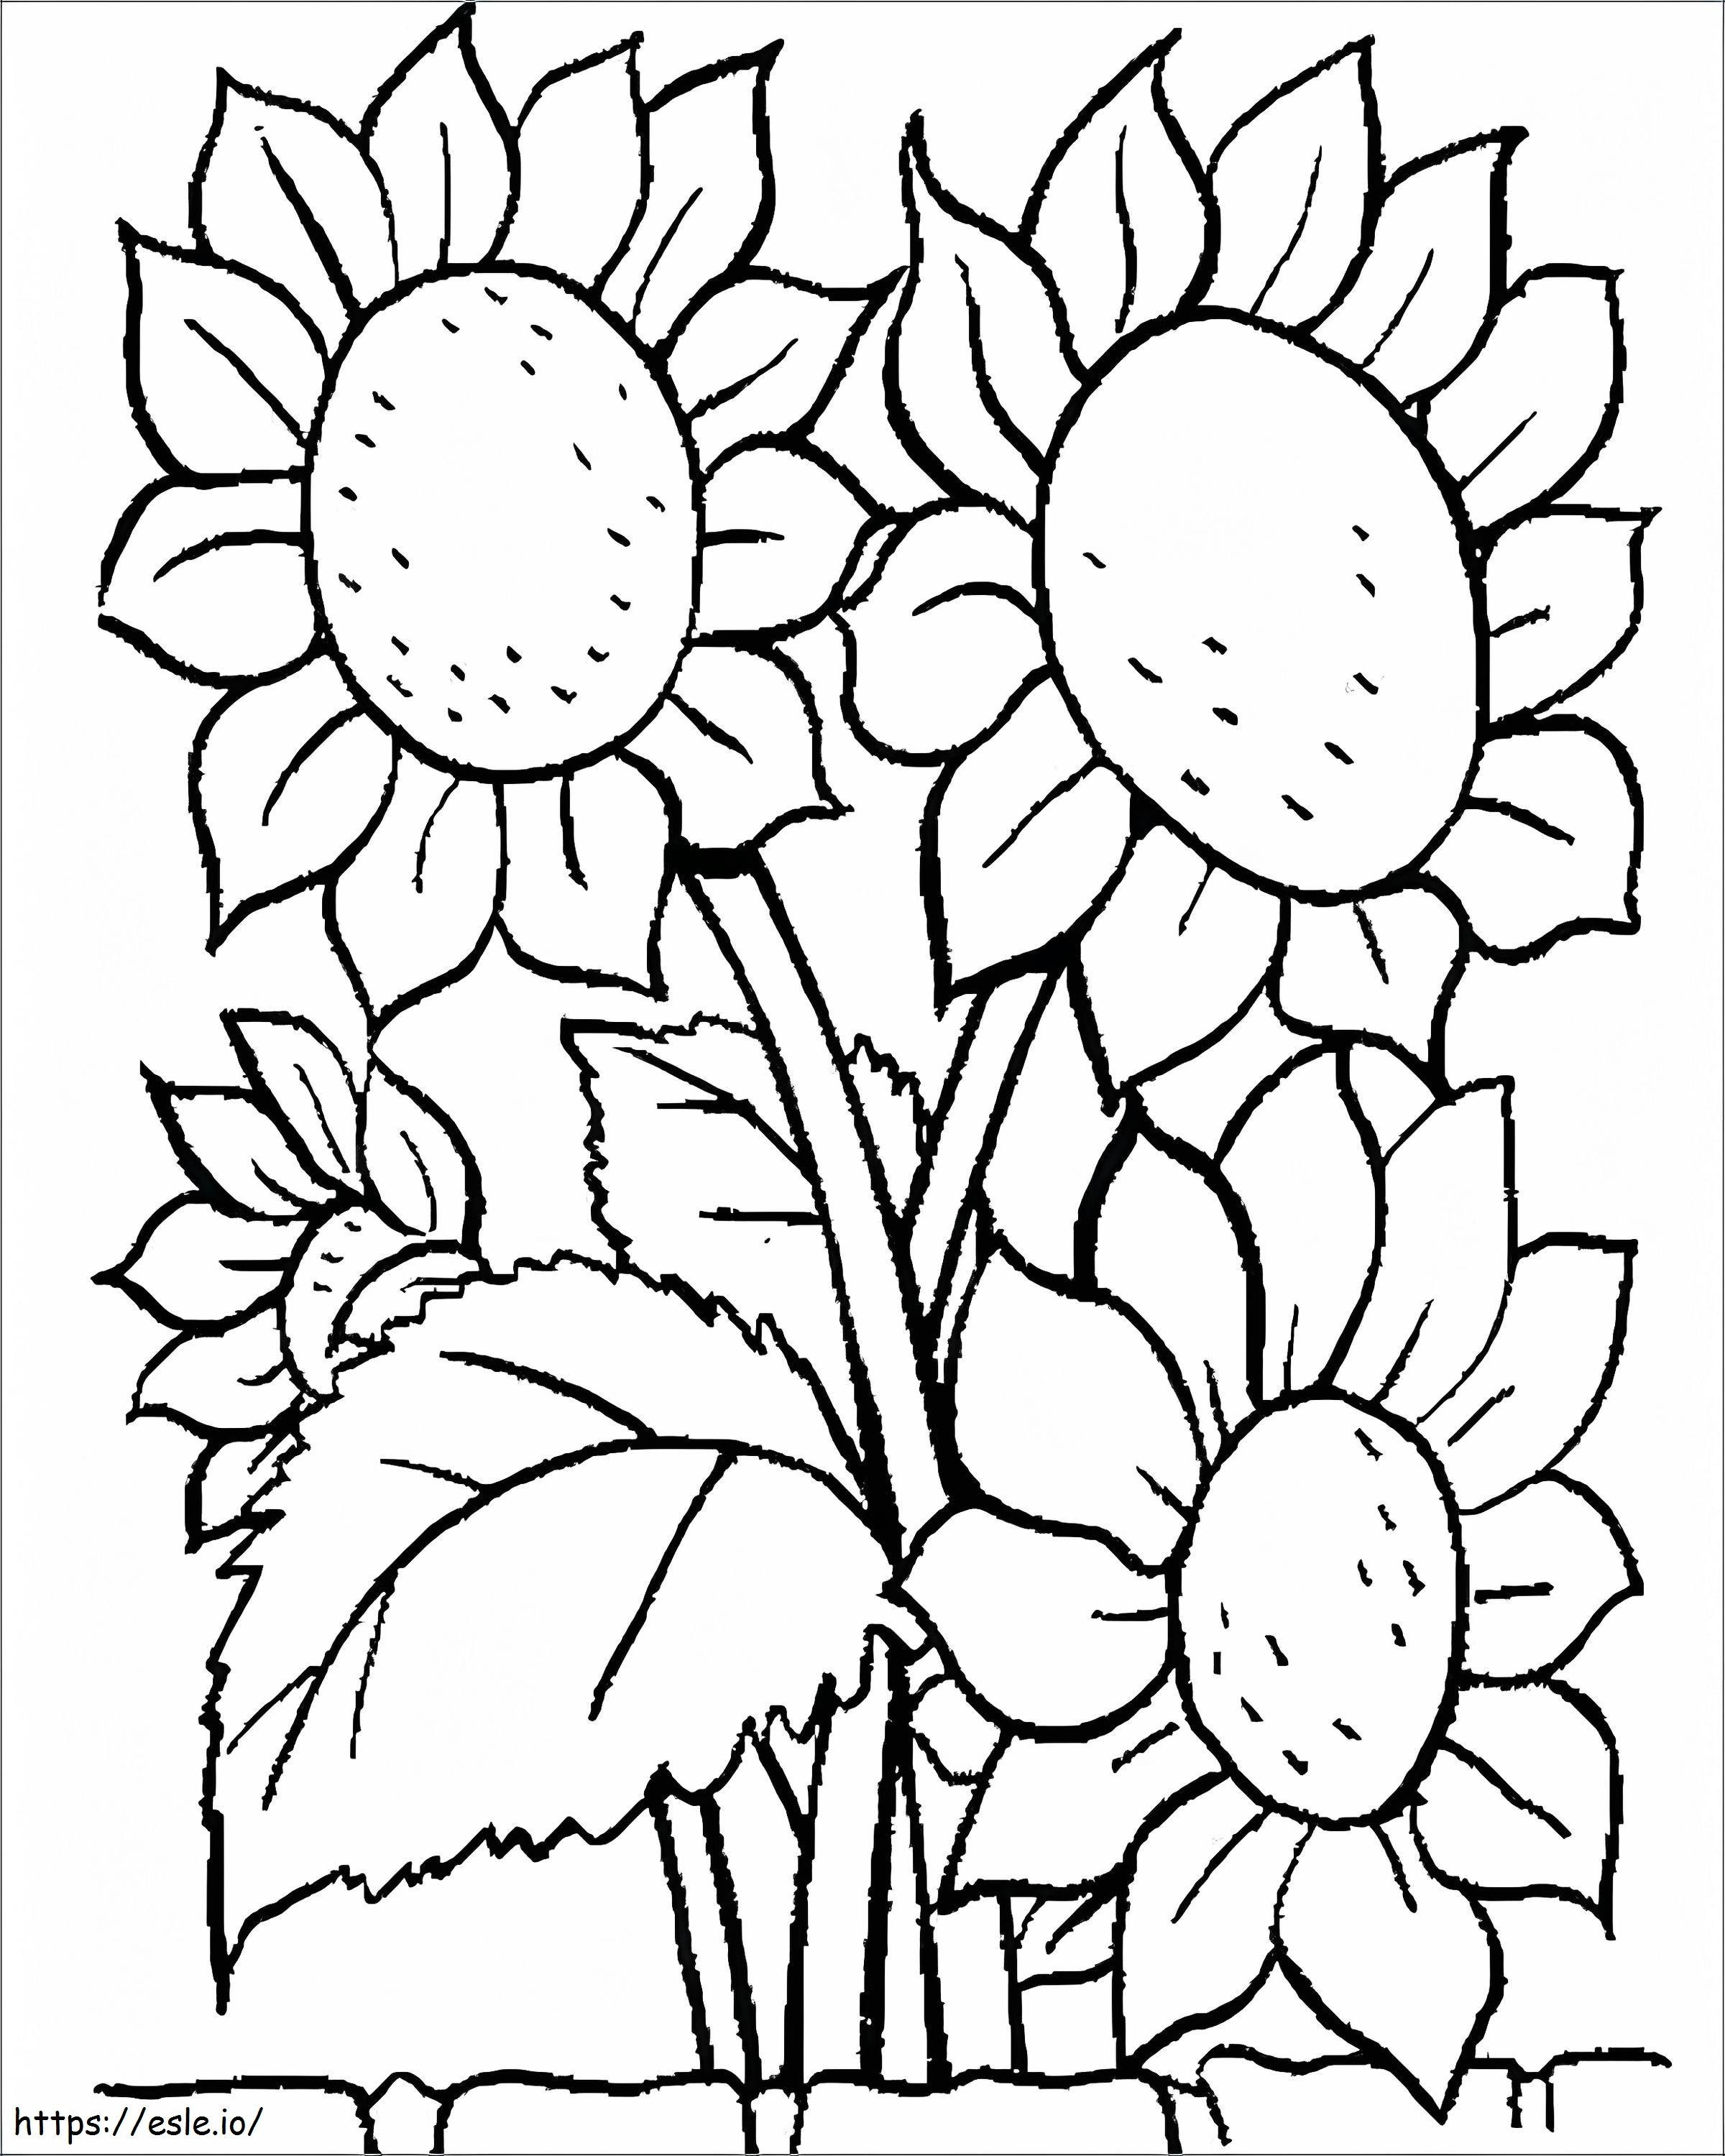 A Bouquet Of Sunflowers coloring page